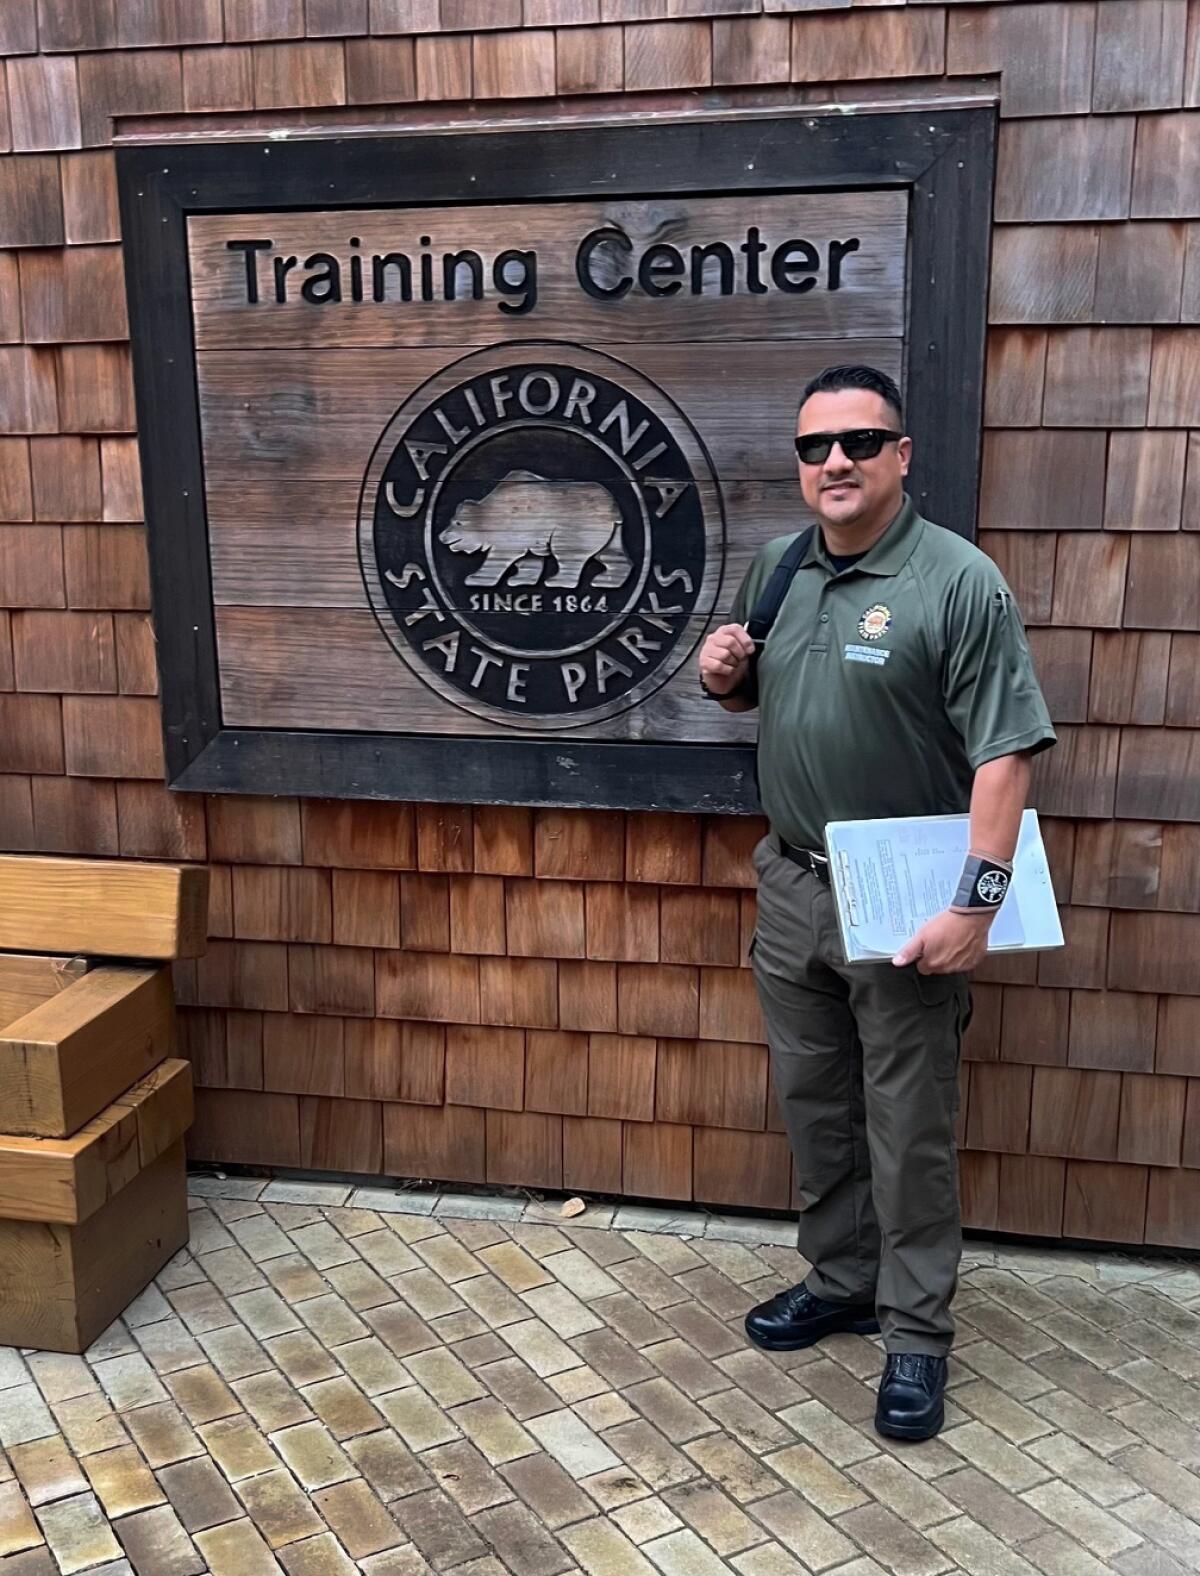 A man standing in front of California State Parks training center sign